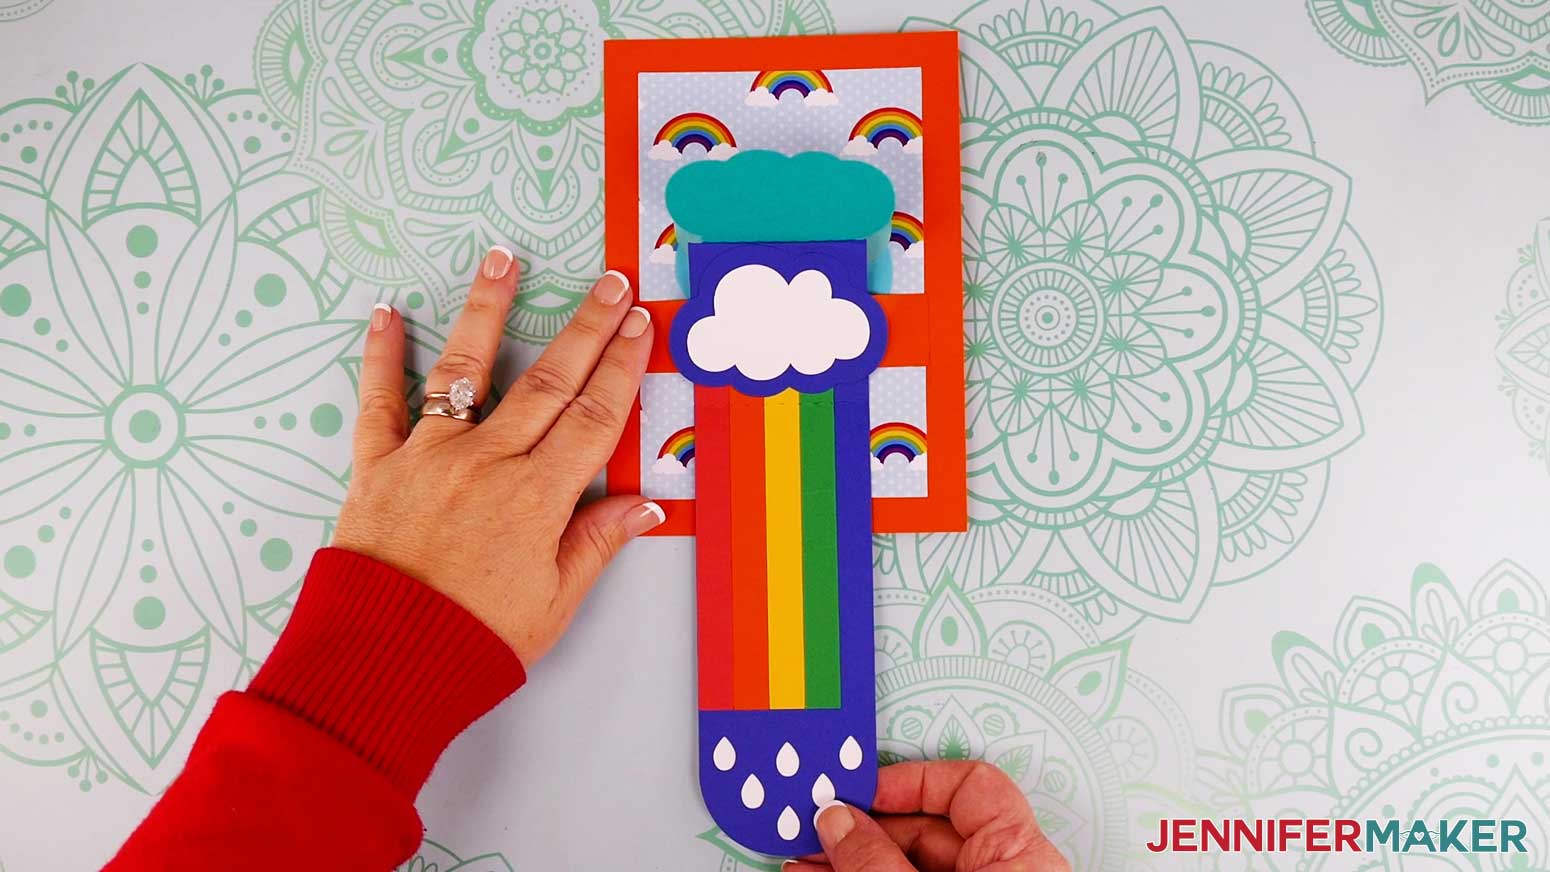 The assembled waterfall card is being opened by pulling down on the raindrop slider section, revealing the rainbow stripes beneath the cloud pieces.